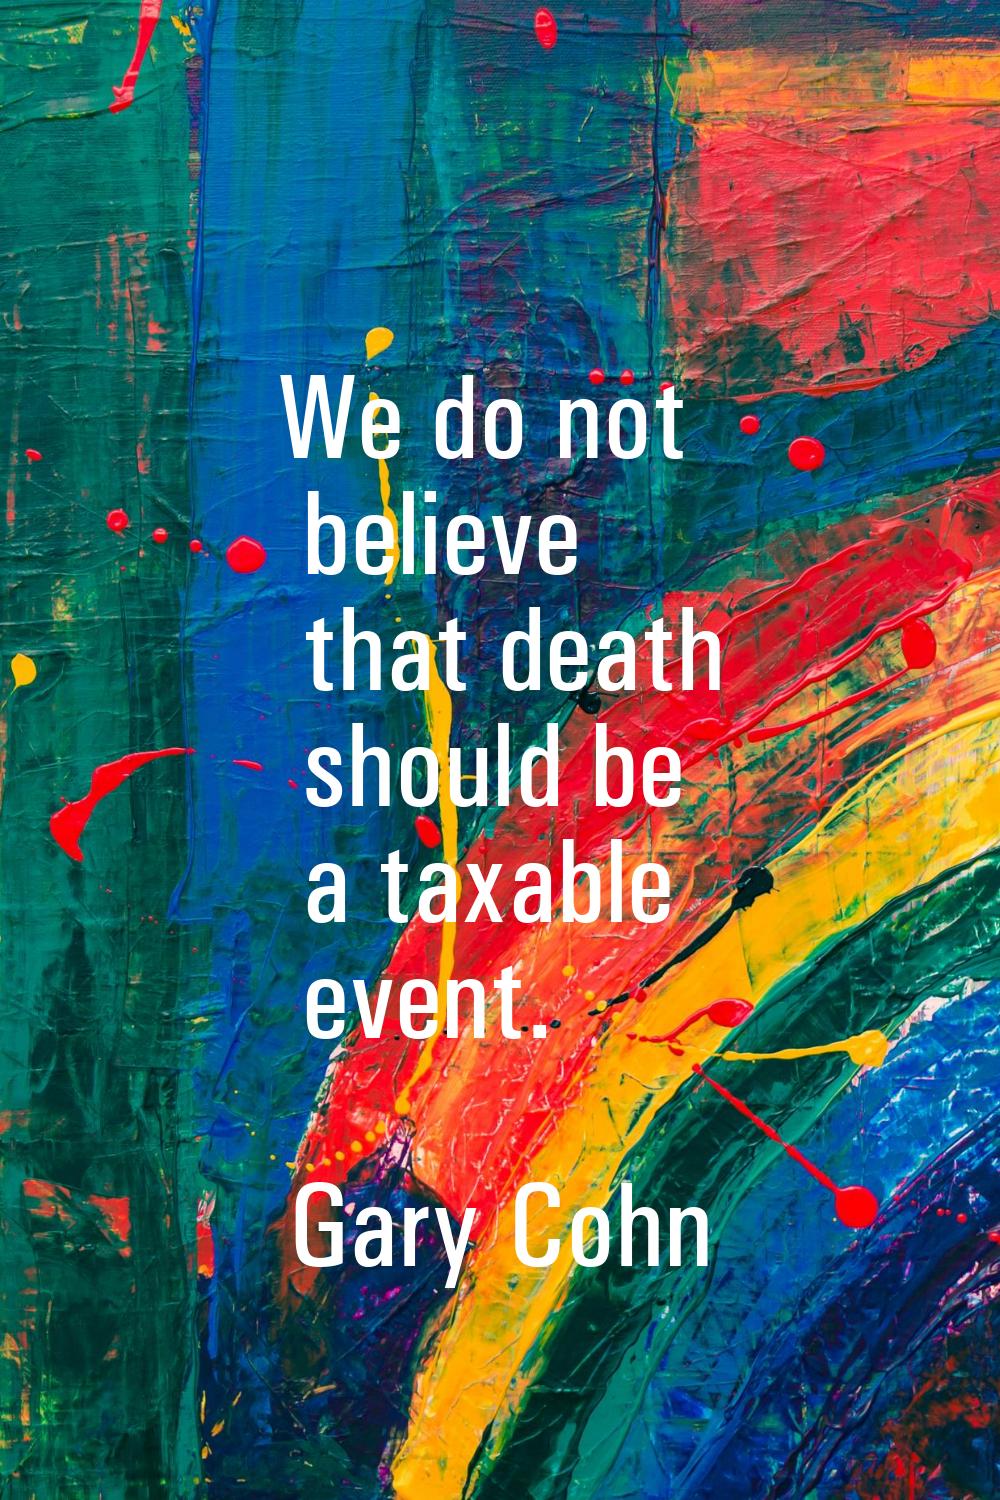 We do not believe that death should be a taxable event.